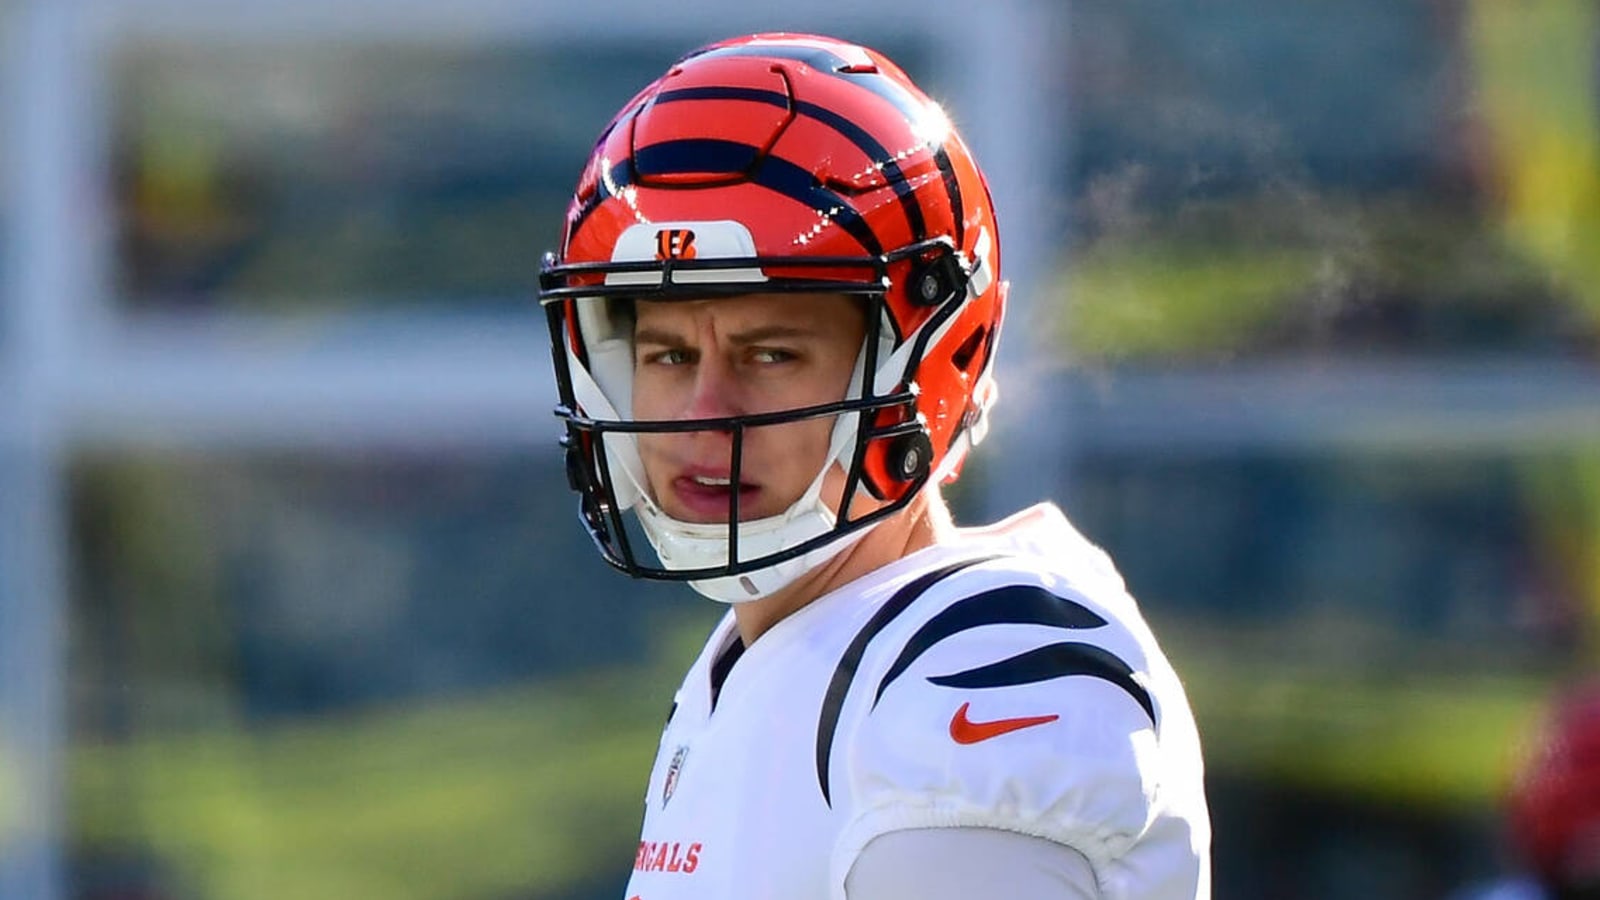 Joe Burrow has swag-filled response to question about Bengals' Super Bowl window